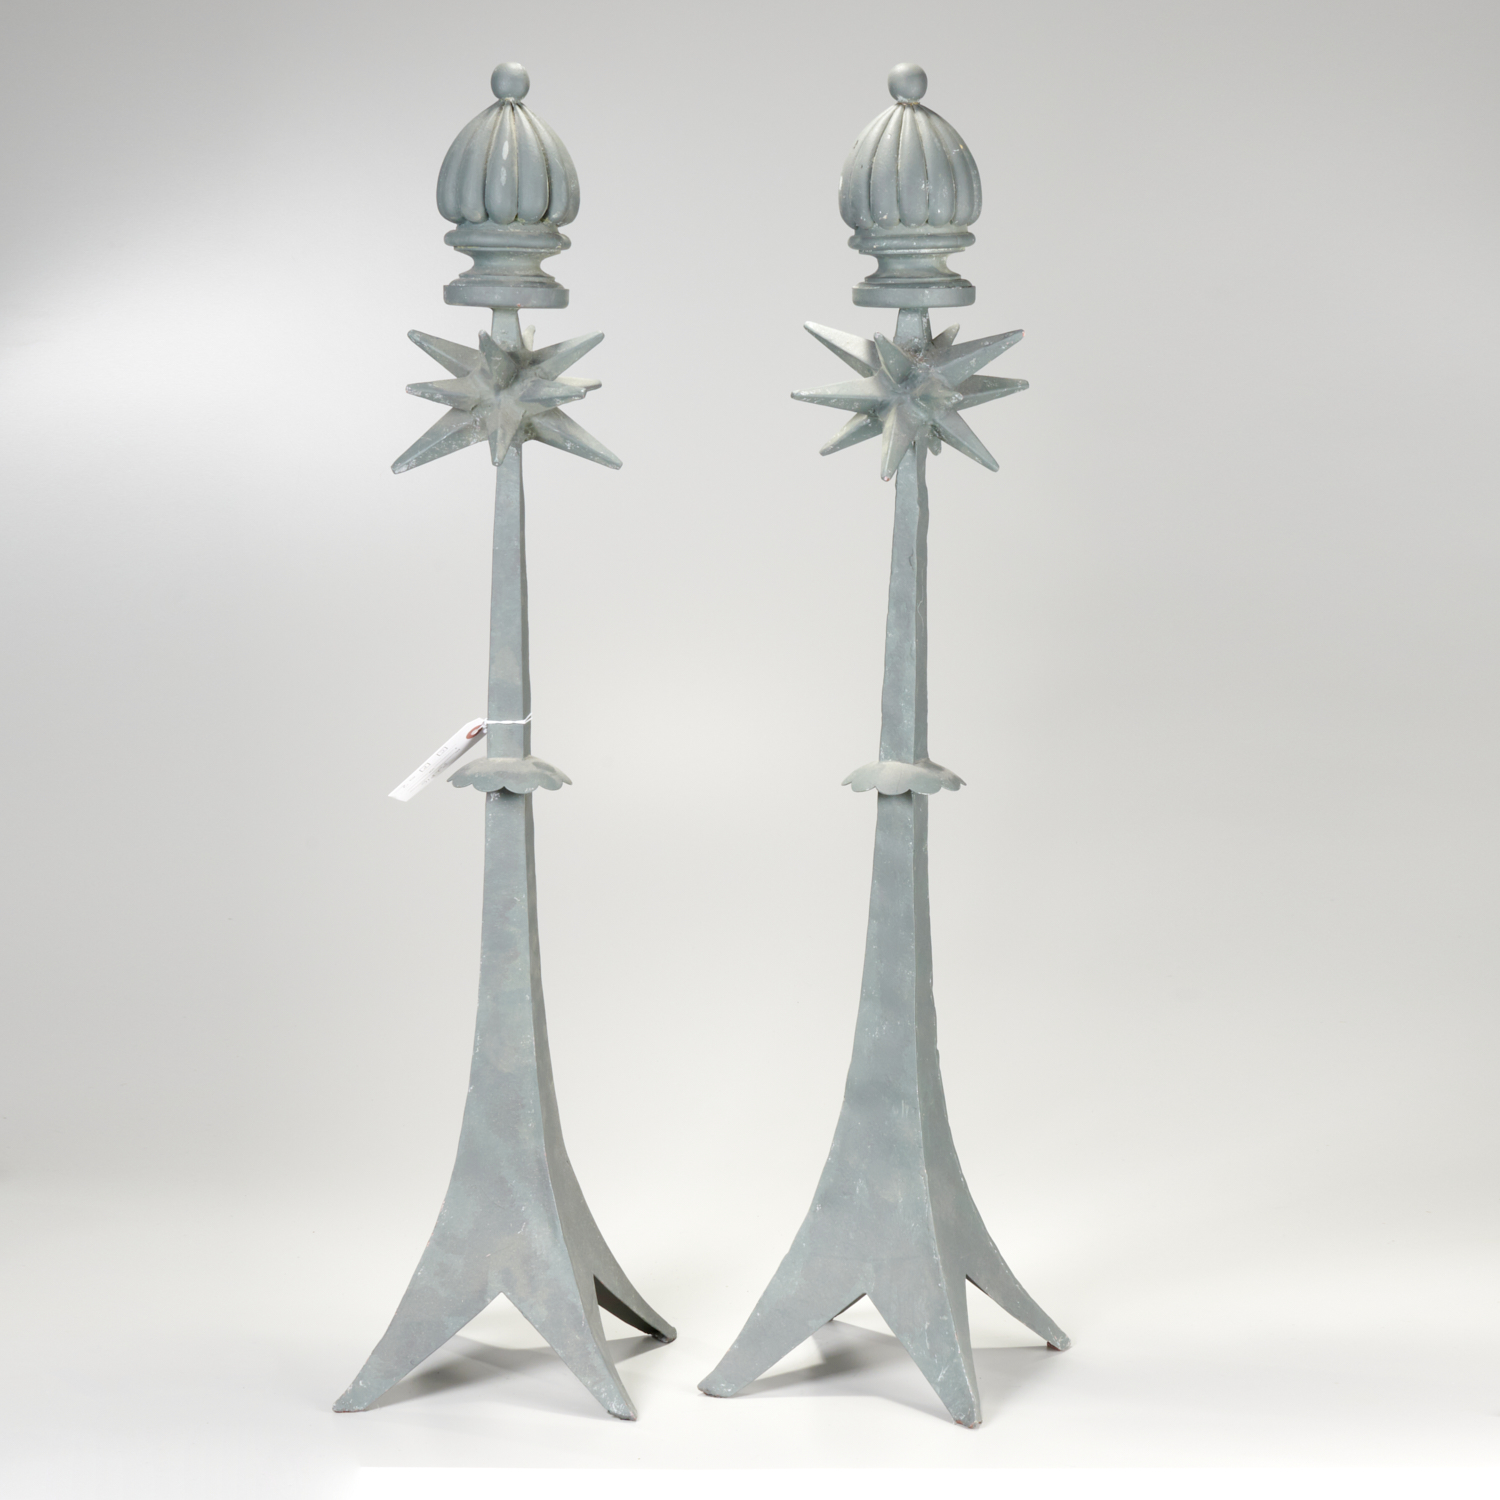 PAIR FRENCH DECORATIVE SPIRE ORNAMENTS